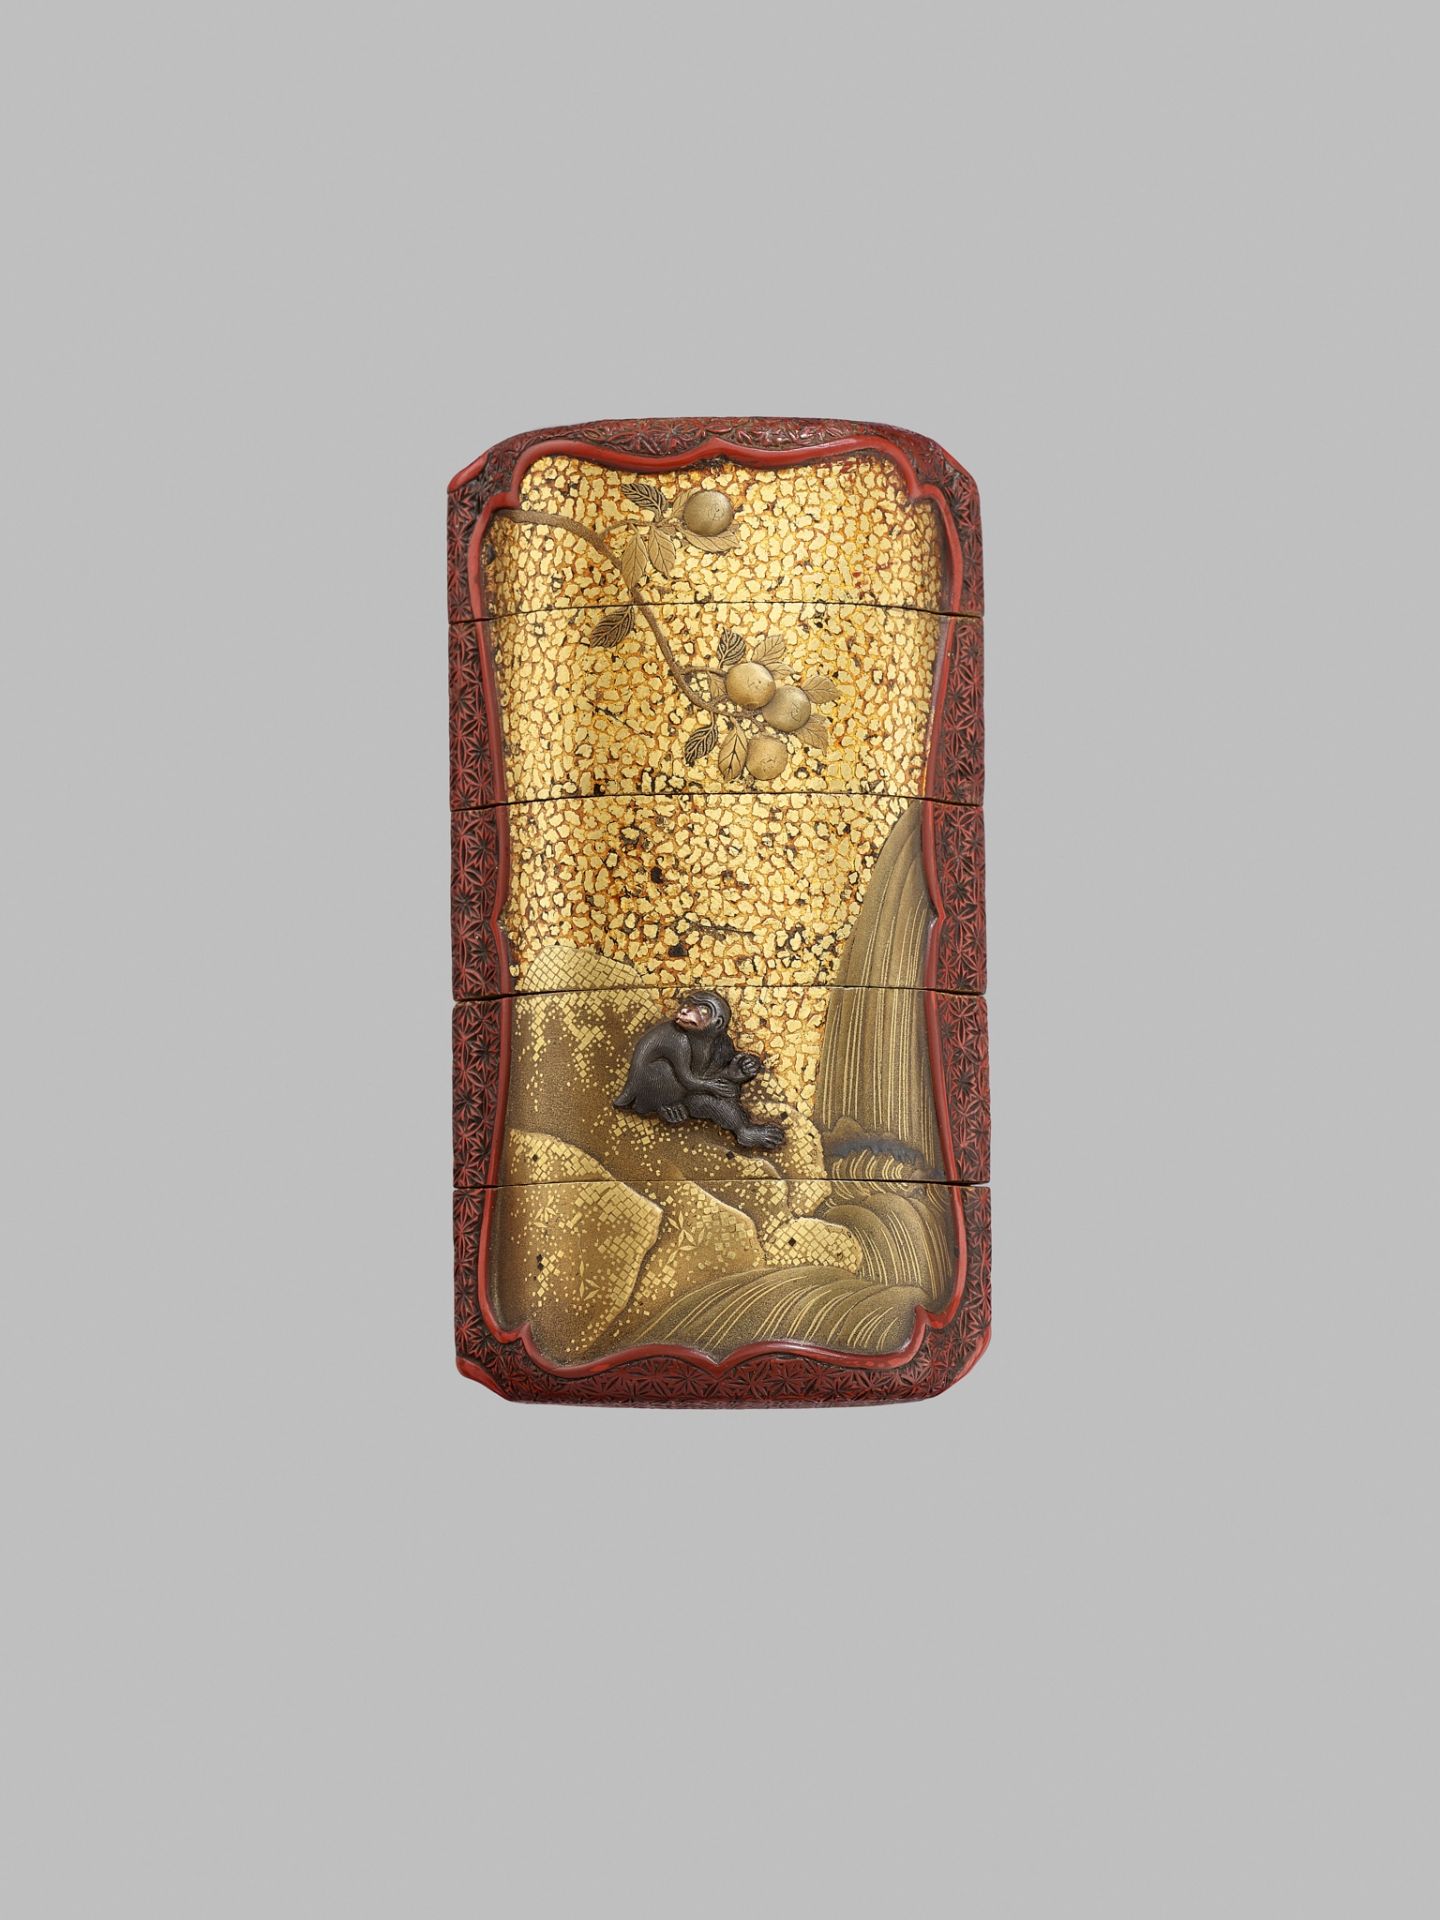 AN UNUSUAL INLAID GOLD LACQUER AND TSUISHU FOUR-CASE INRO WITH MONKEYS - Image 3 of 4